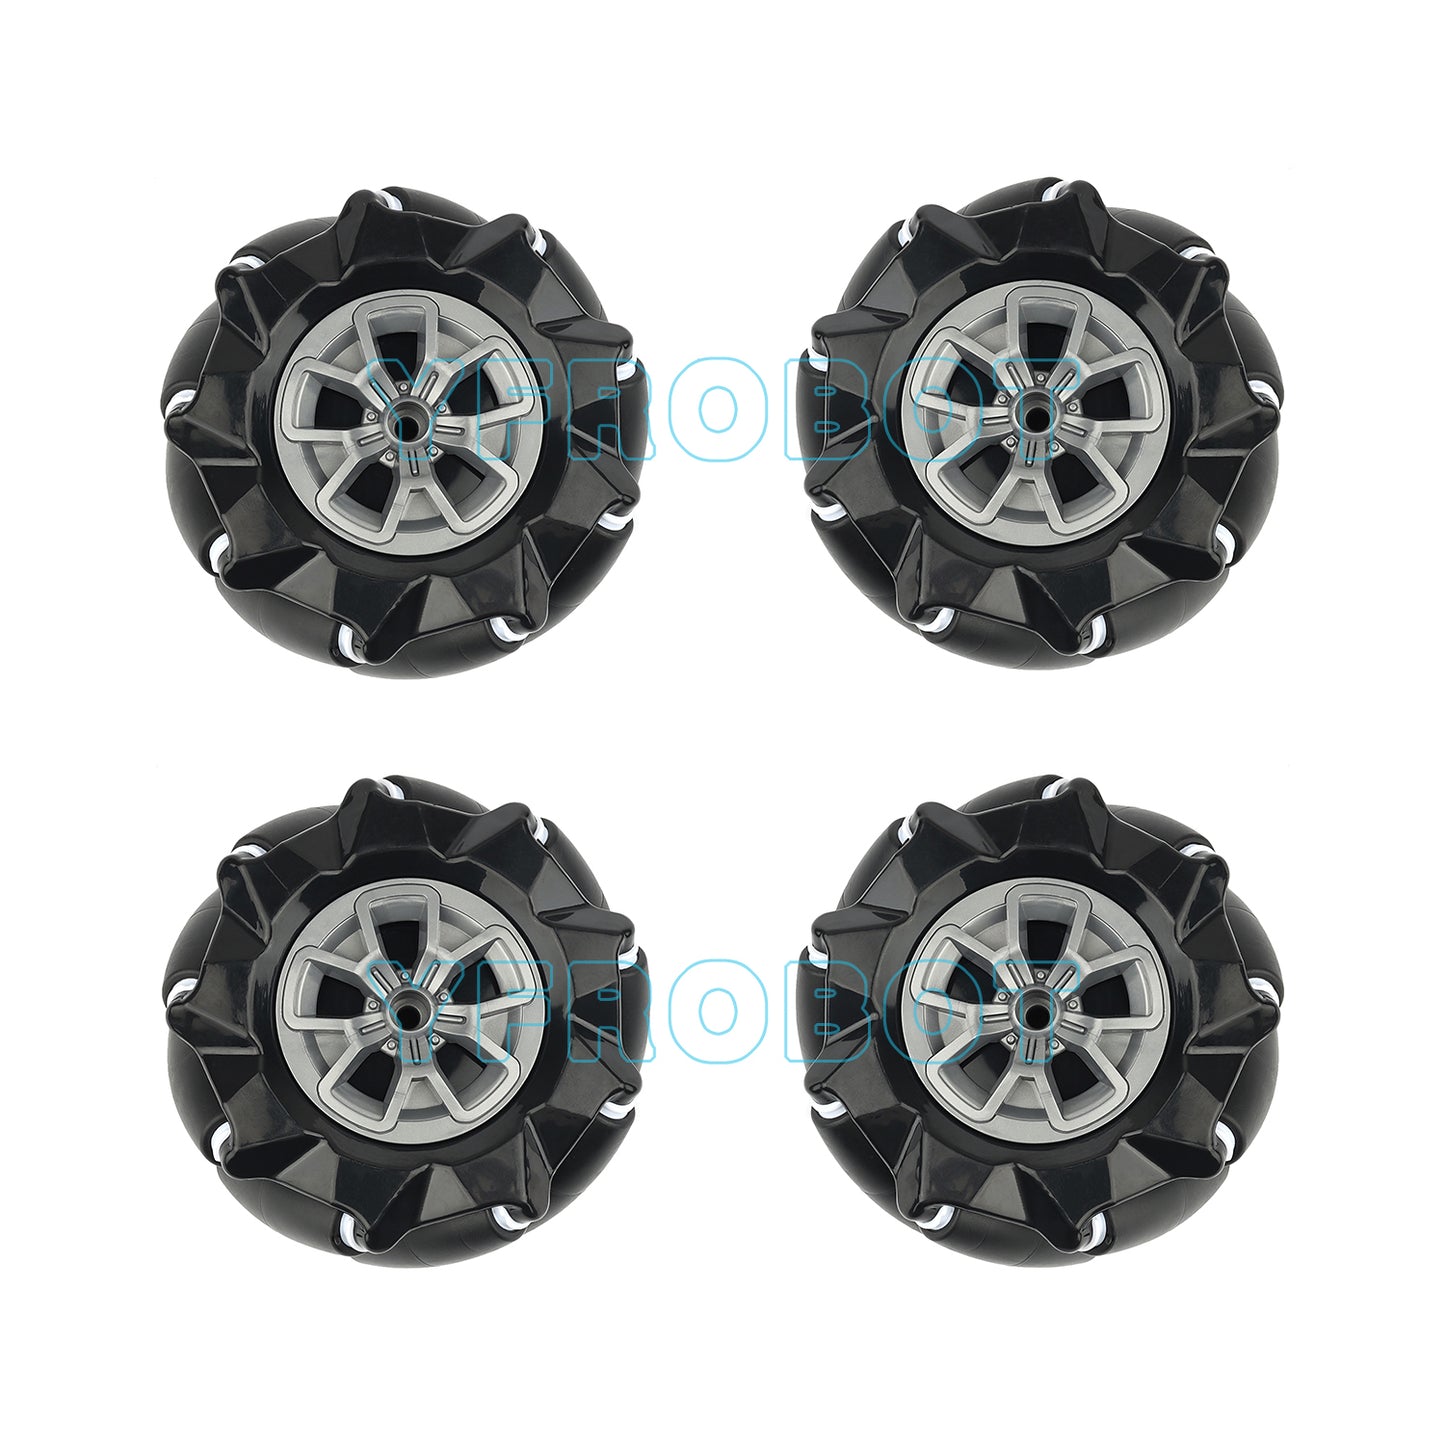 YFROBOT Plastic Mecanum Wheels, 80mm in size, come in a set of four with couplings included